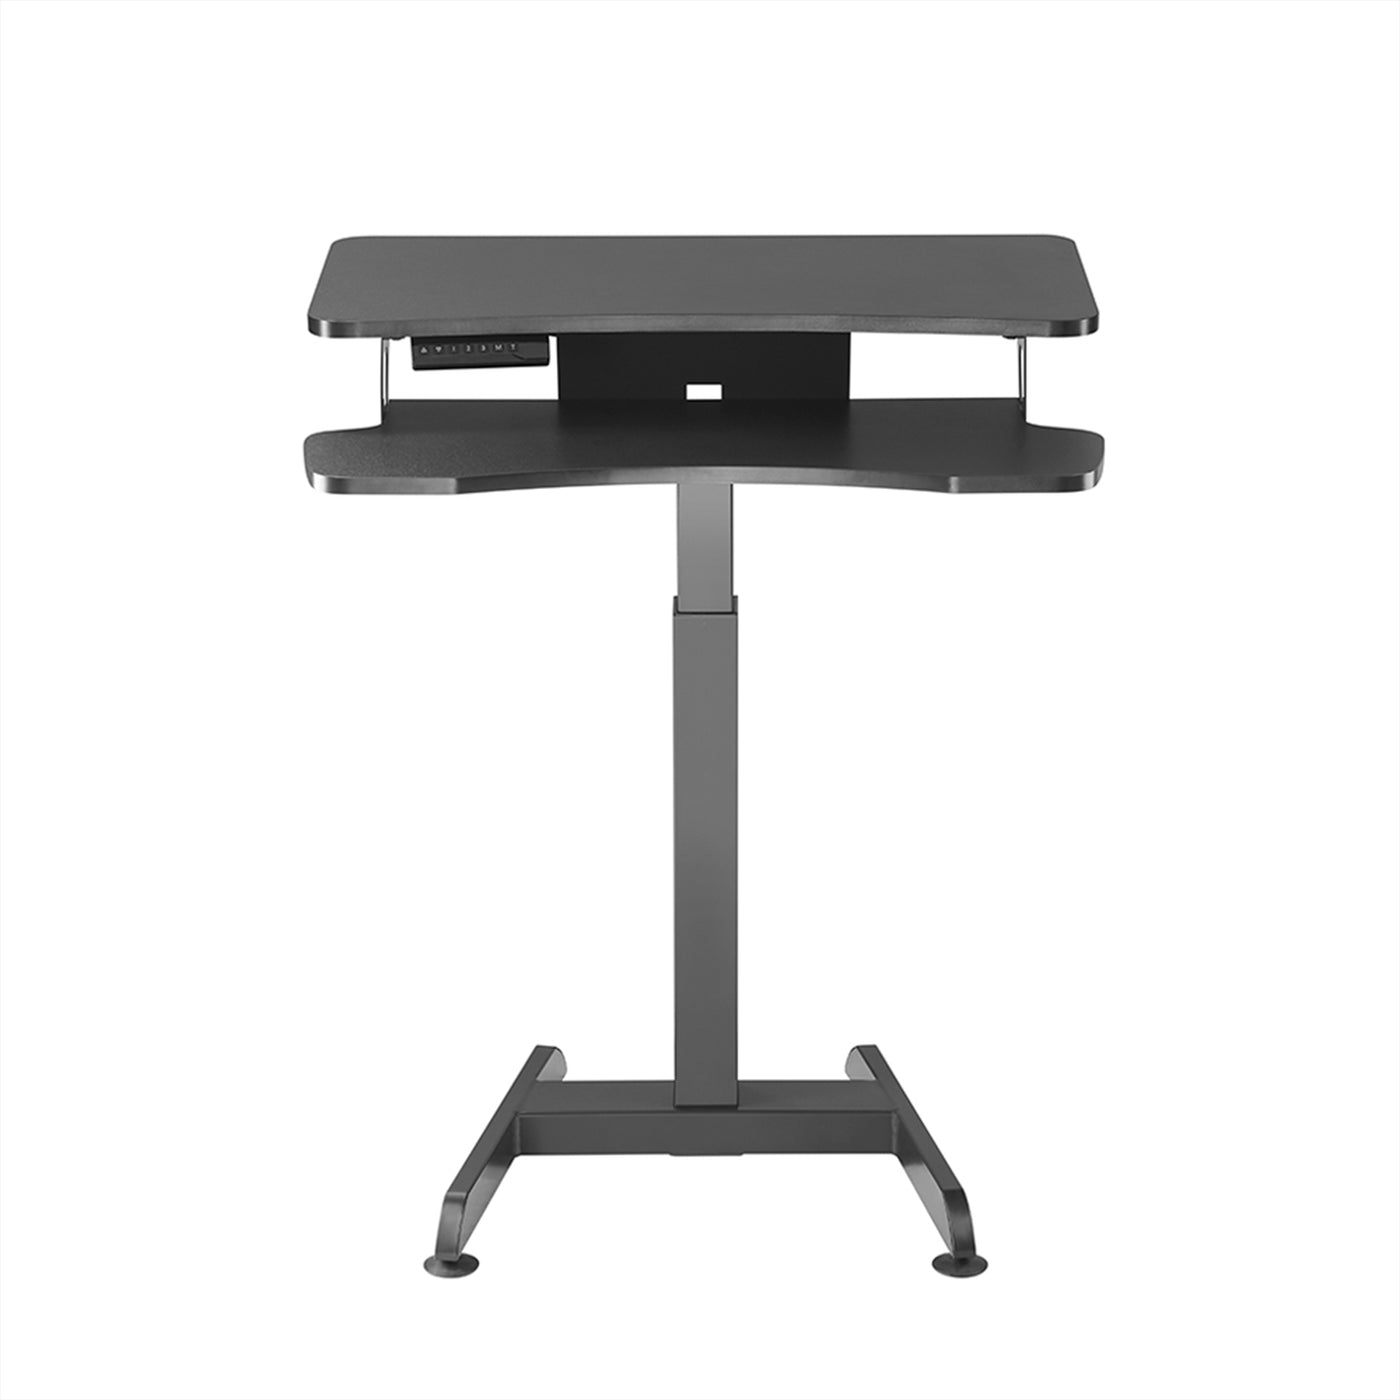 Maclean MC-835 Portable Desk Electric Height Adjustable 72 -122cm max. 37 kg Control Panel Sit Stand Work Station